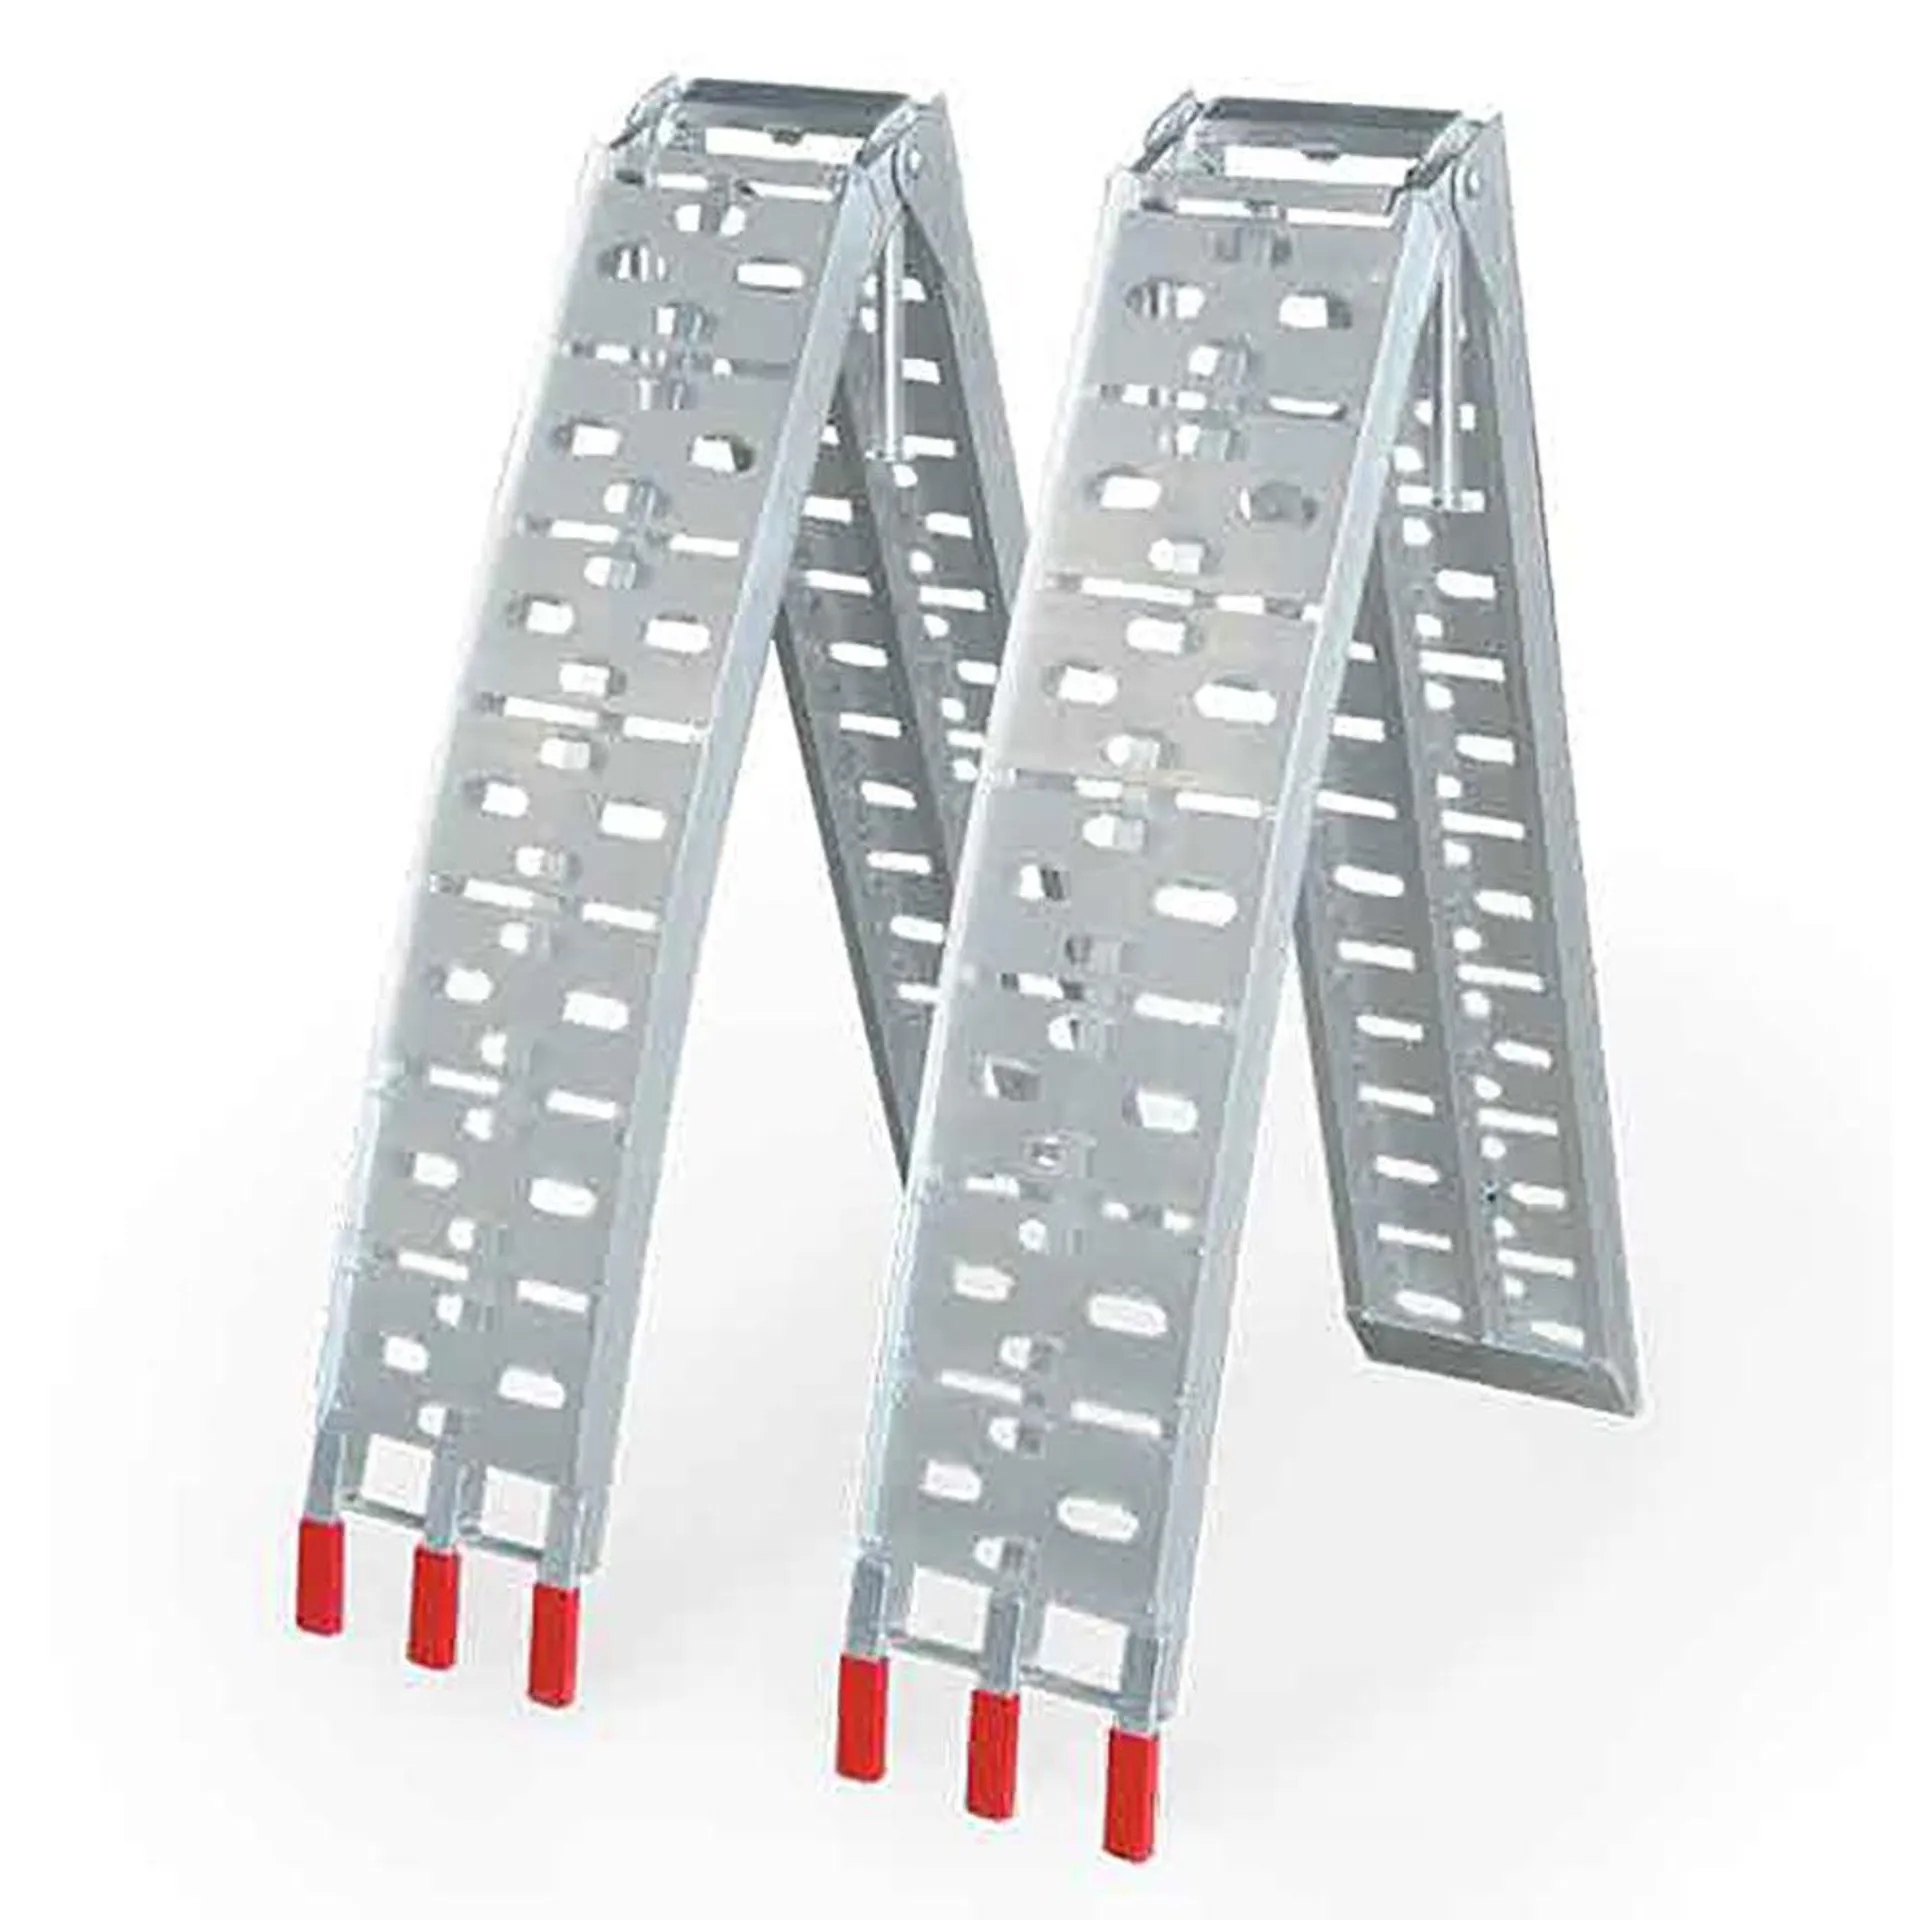 Pair of Loading Ramps with Support Legs